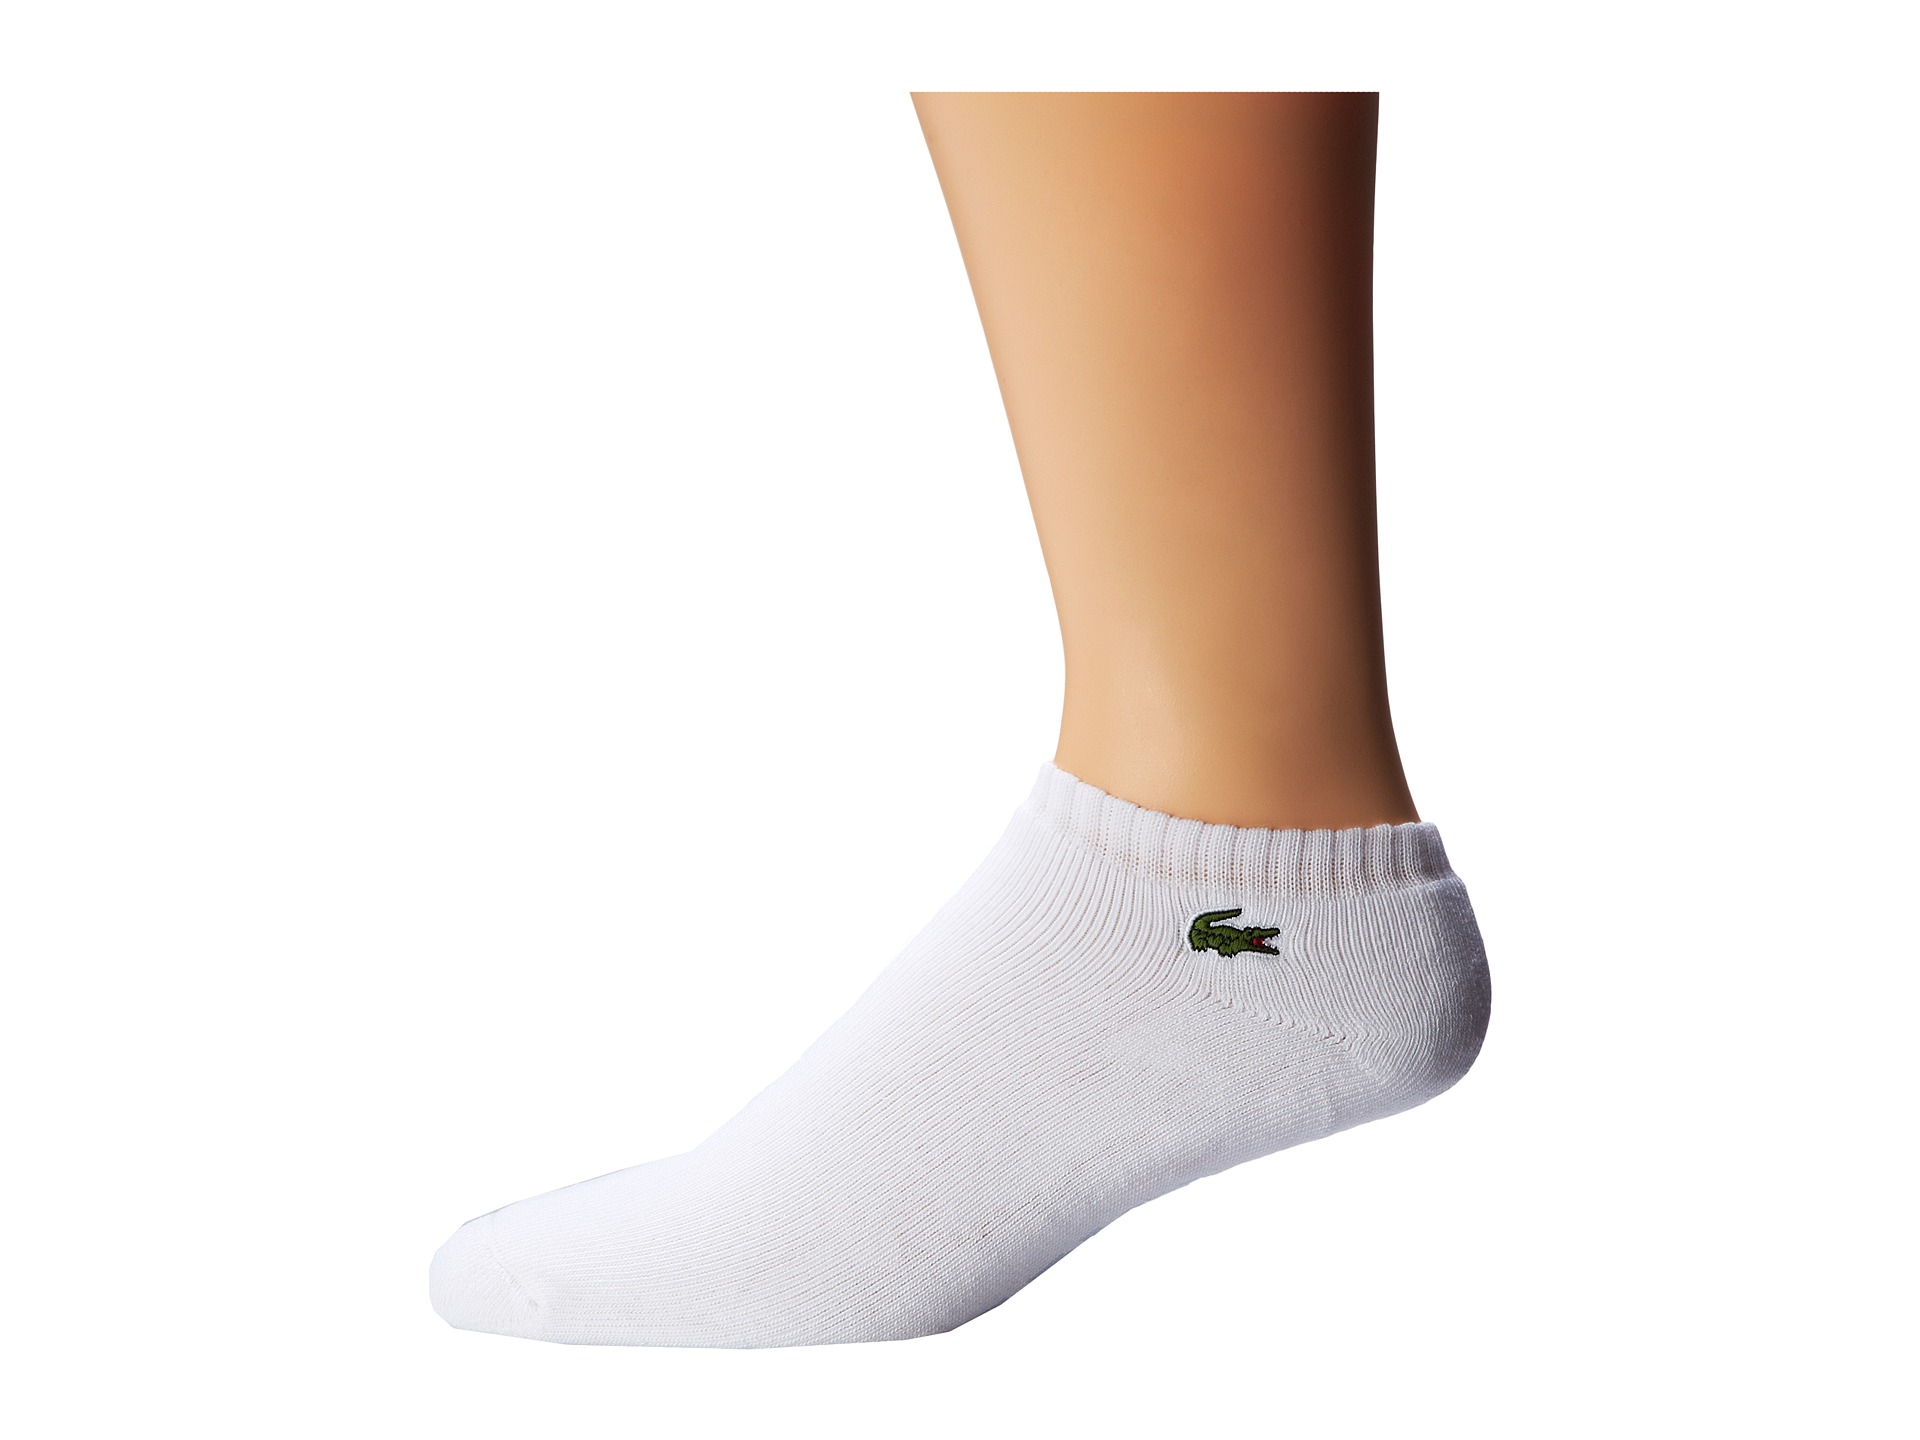 Lacoste Ped Sock White, Clothing | Shipped Free at Zappos